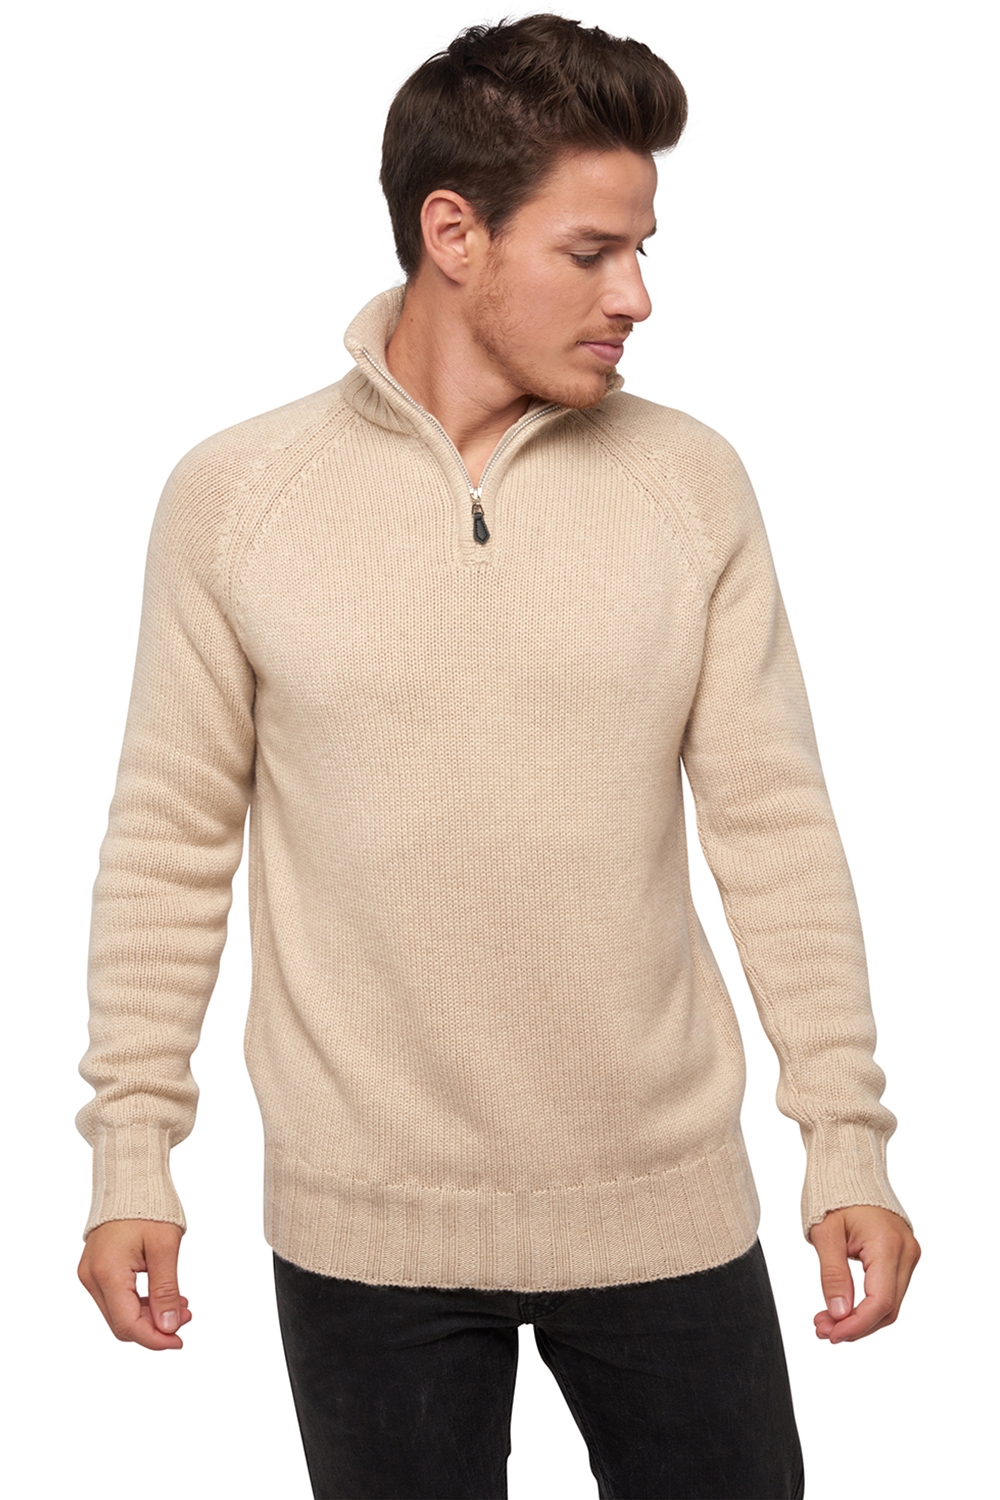  men polo style sweaters natural viero natural beige xl